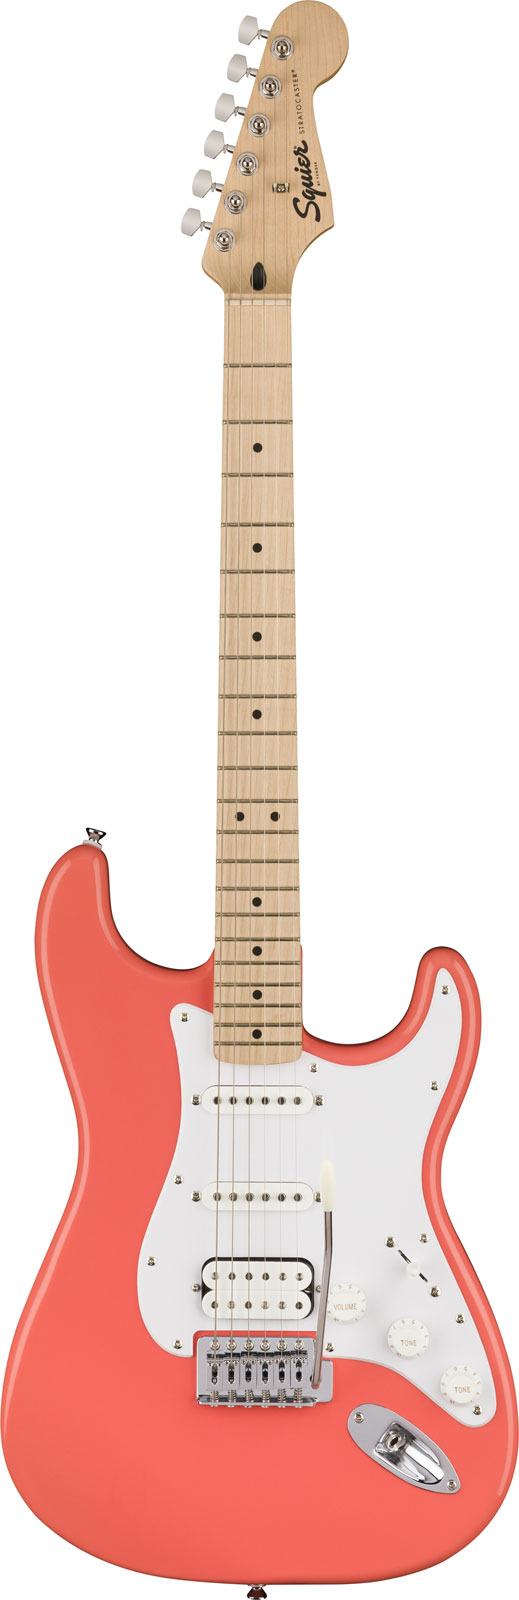 SQUIER STRATOCASTER HSS SONIC MN TAHITIAN CORAL